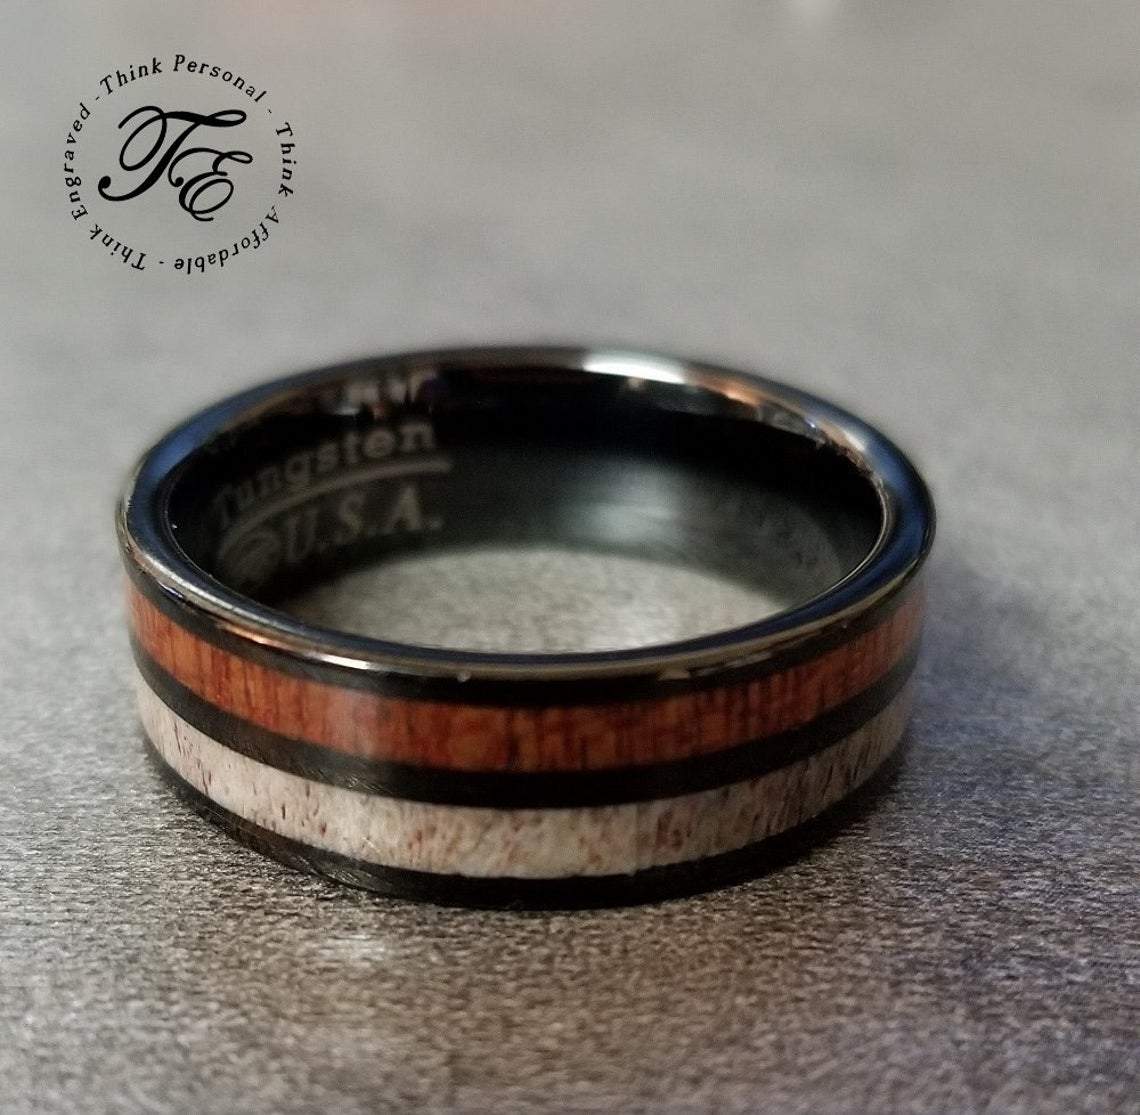 ThinkEngraved Promise Ring Personalized Men's Promise Ring - Wood and Deer Antler Inlay Real Tungsten